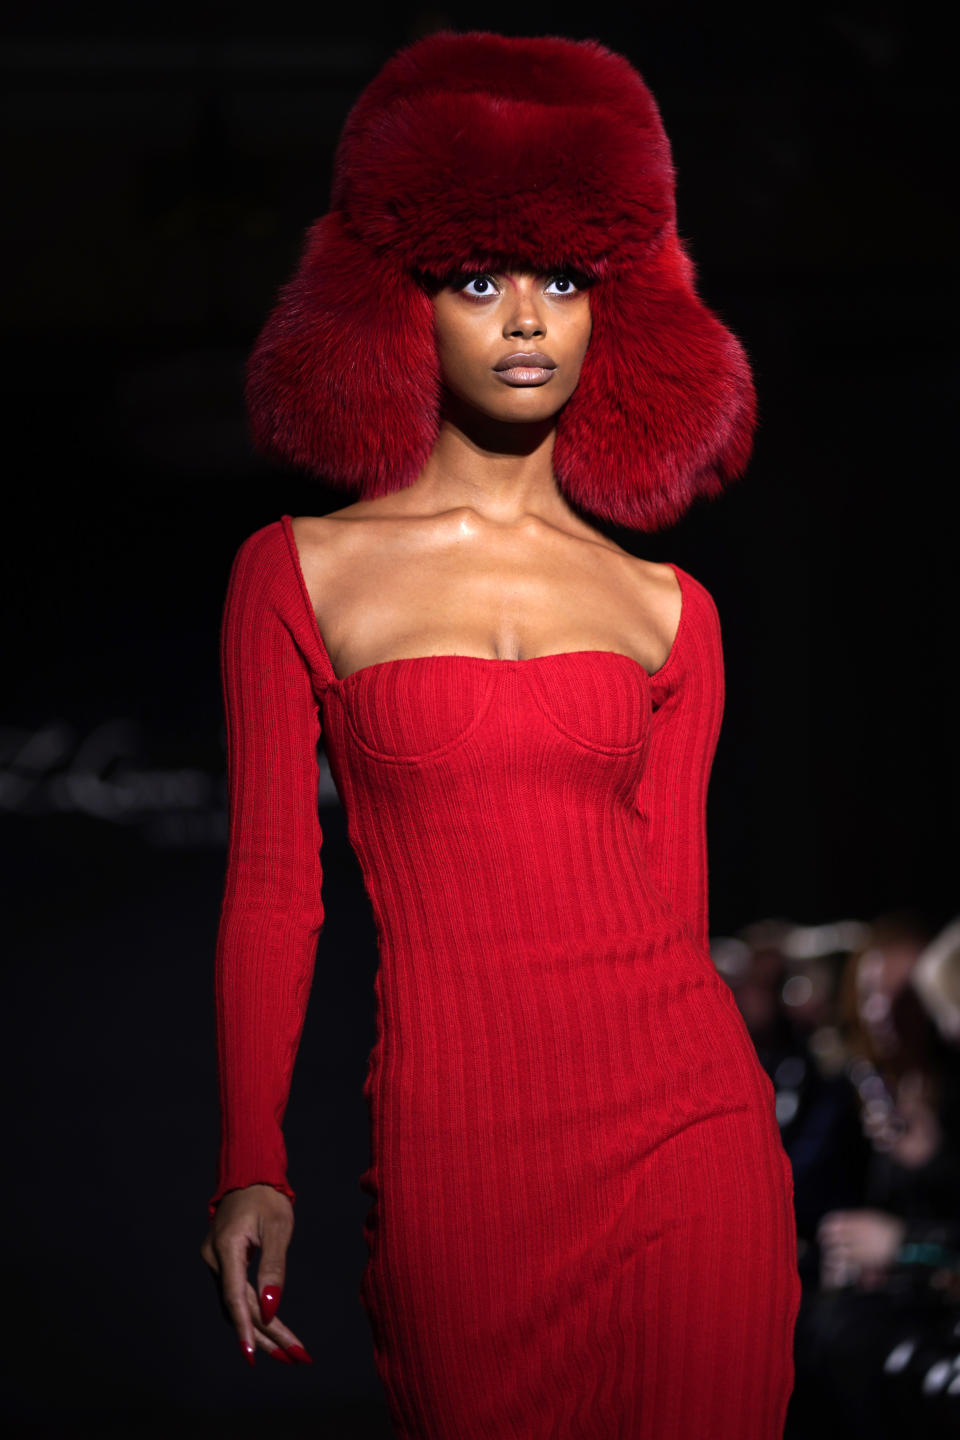 The LaQuan Smith Fall/Winter 2022 collection is modeled at 60 Pine Street during New York Fashion Week on Monday, Feb. 14, 2022, in New York. (Photo by Charles Sykes/Invision/AP)